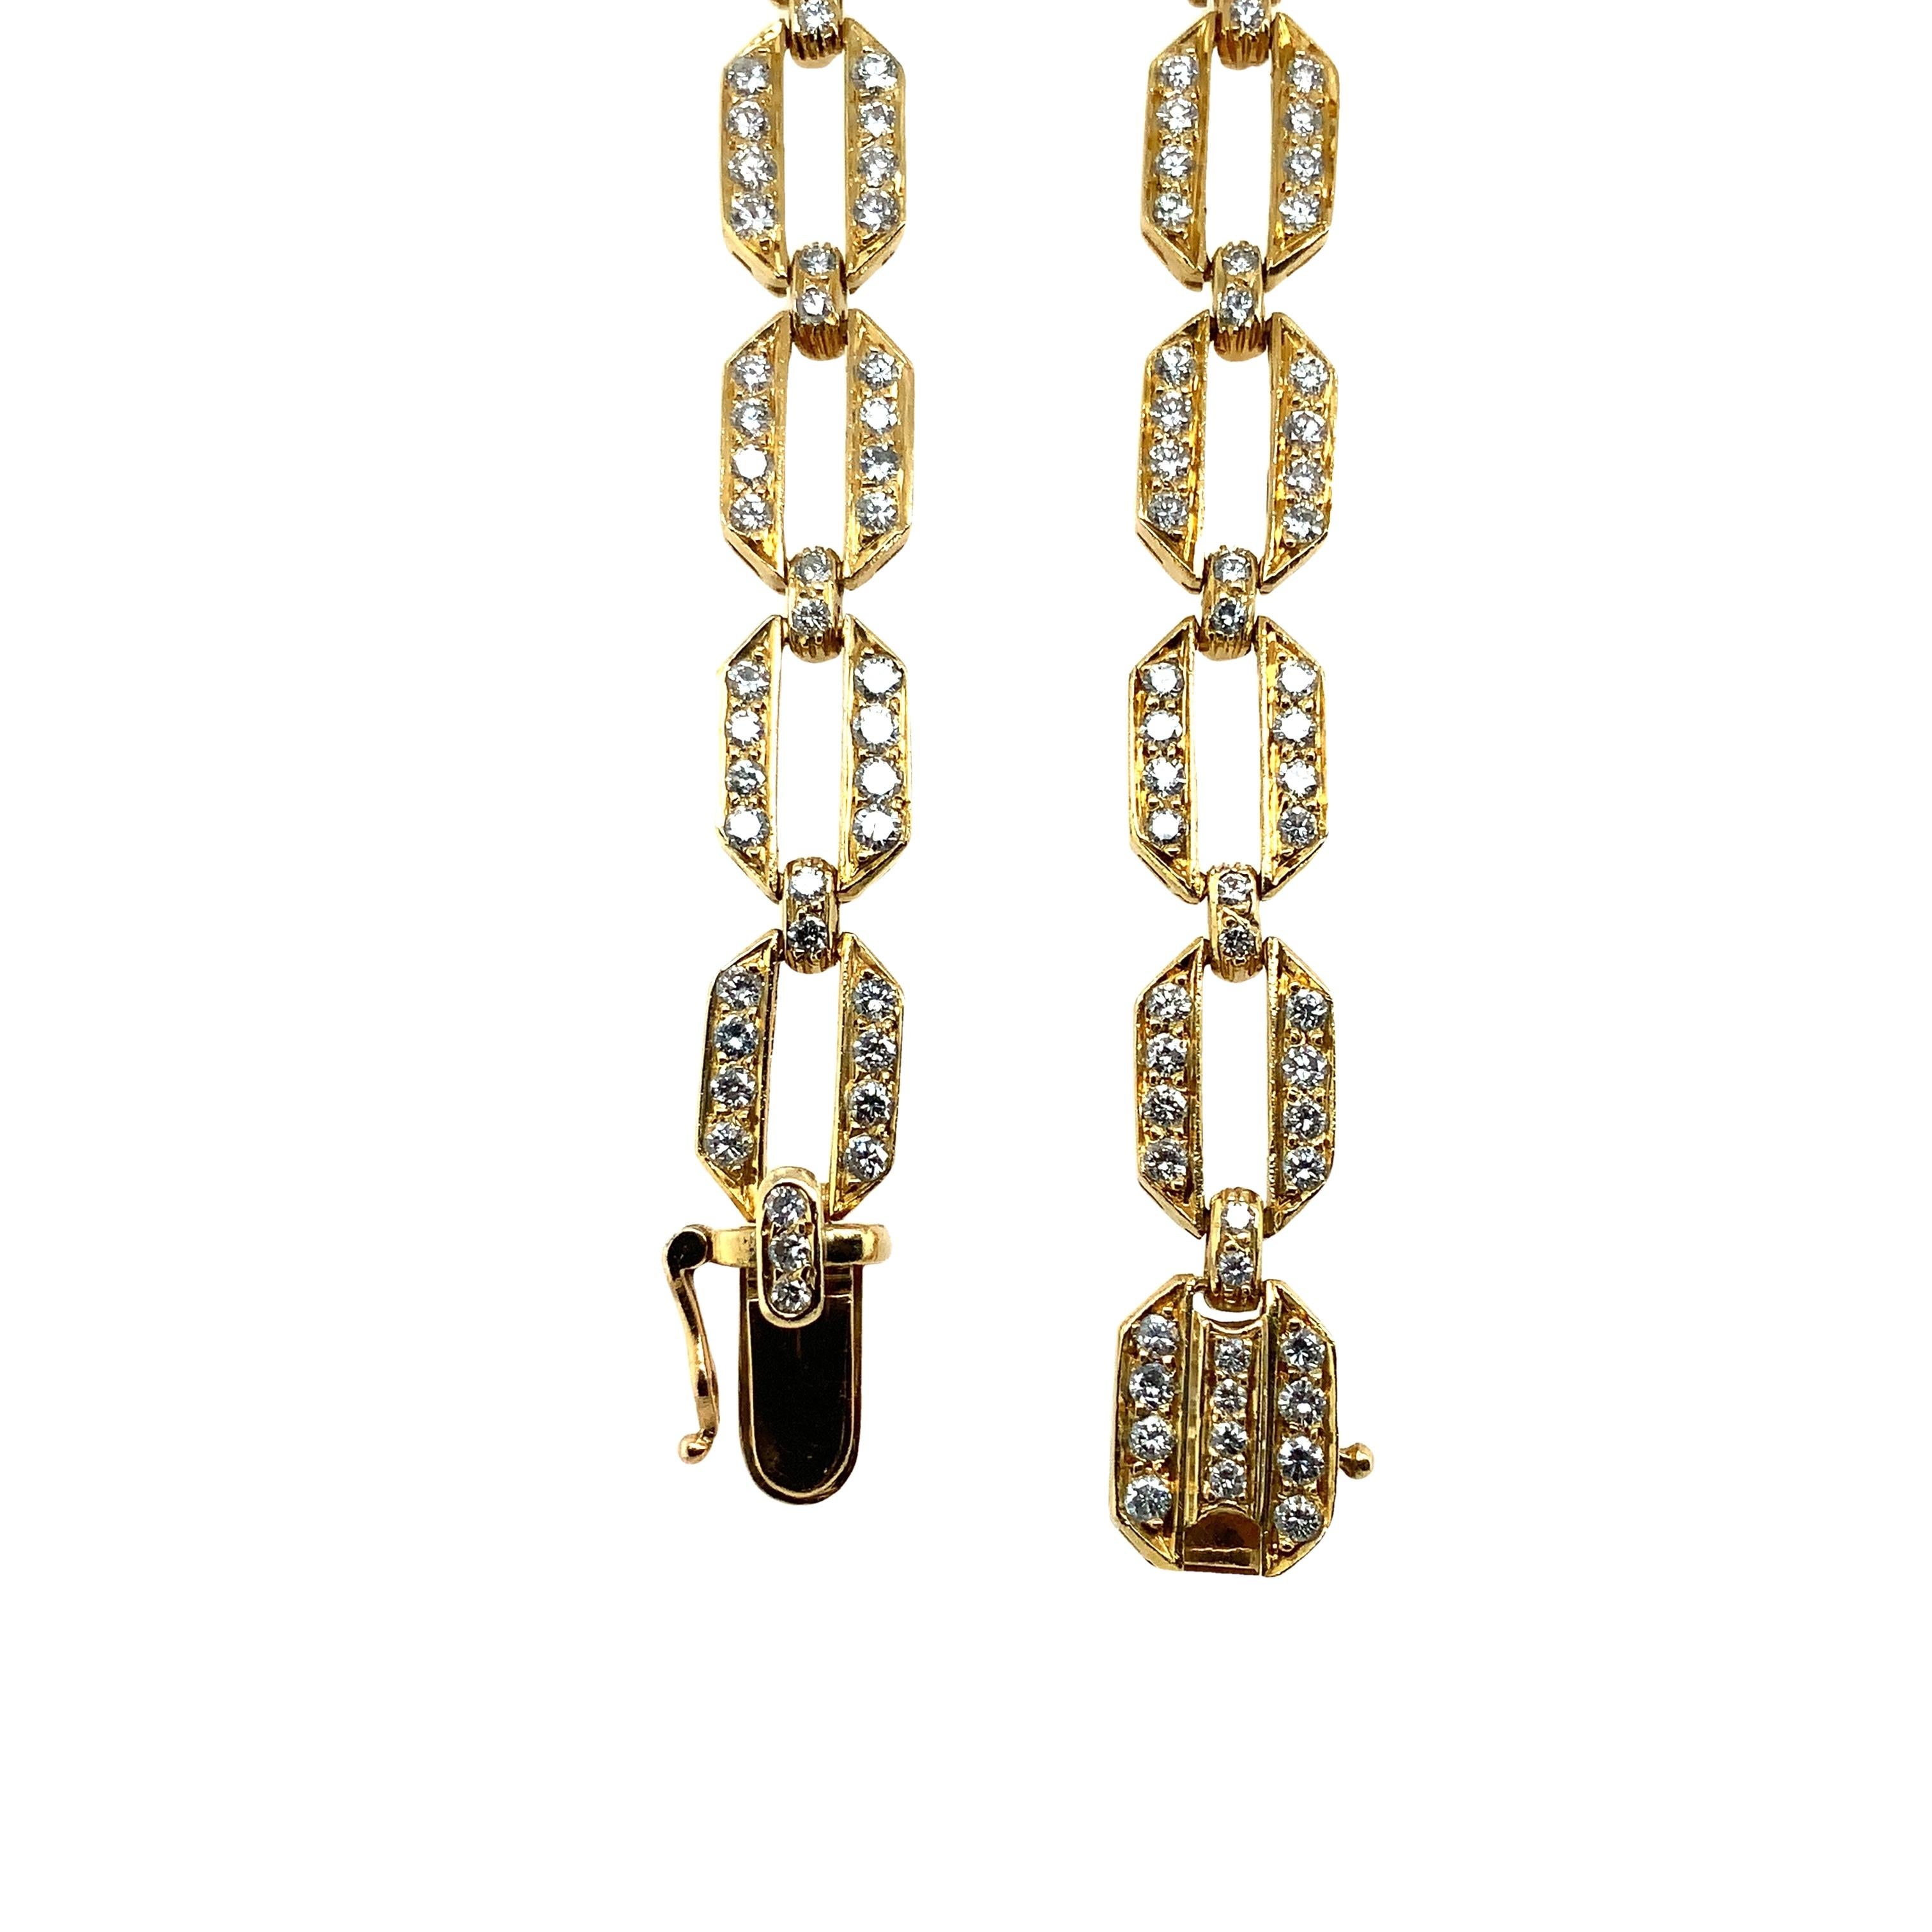 Important One of a Kind Vintage Diamond Link Necklace set in 18k Yellow Gold For Sale 4